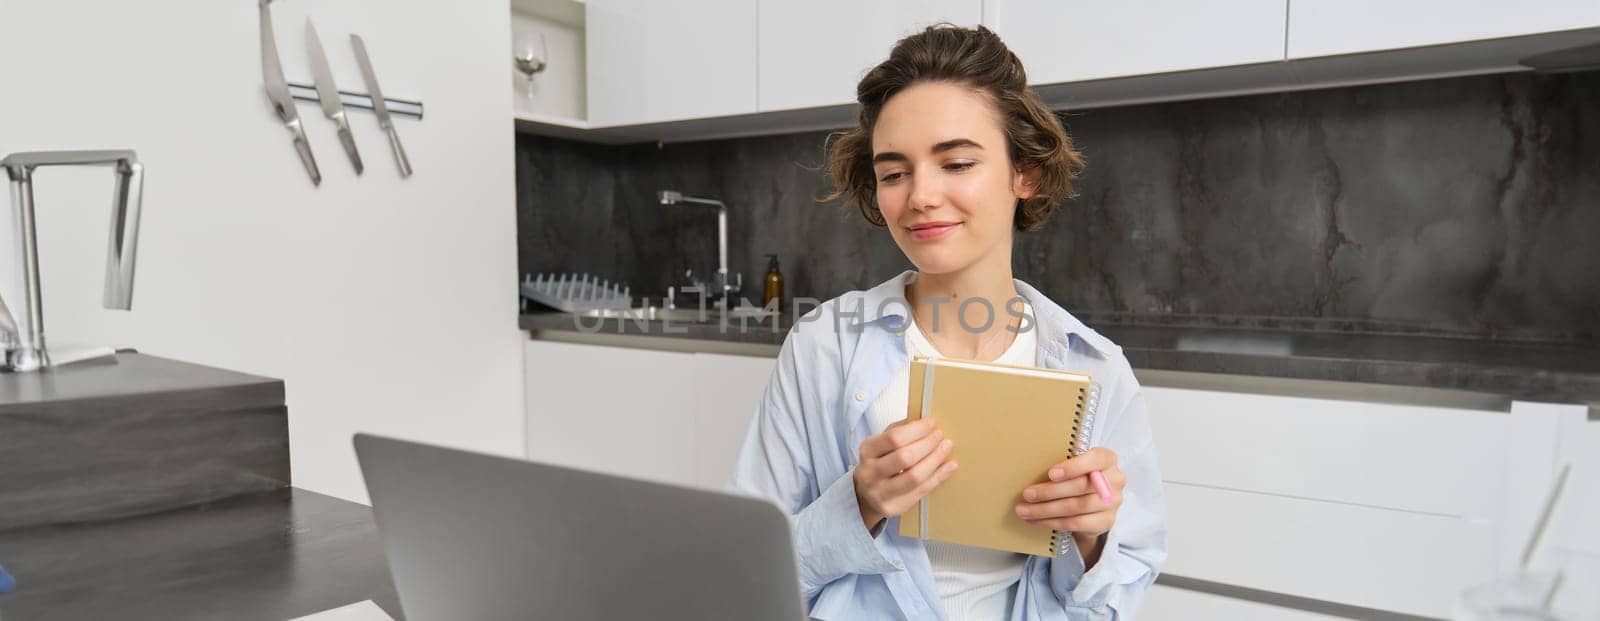 Portrait of businesswoman works from home, looks at laptop and writes down information, makes notes, studies online on course website.